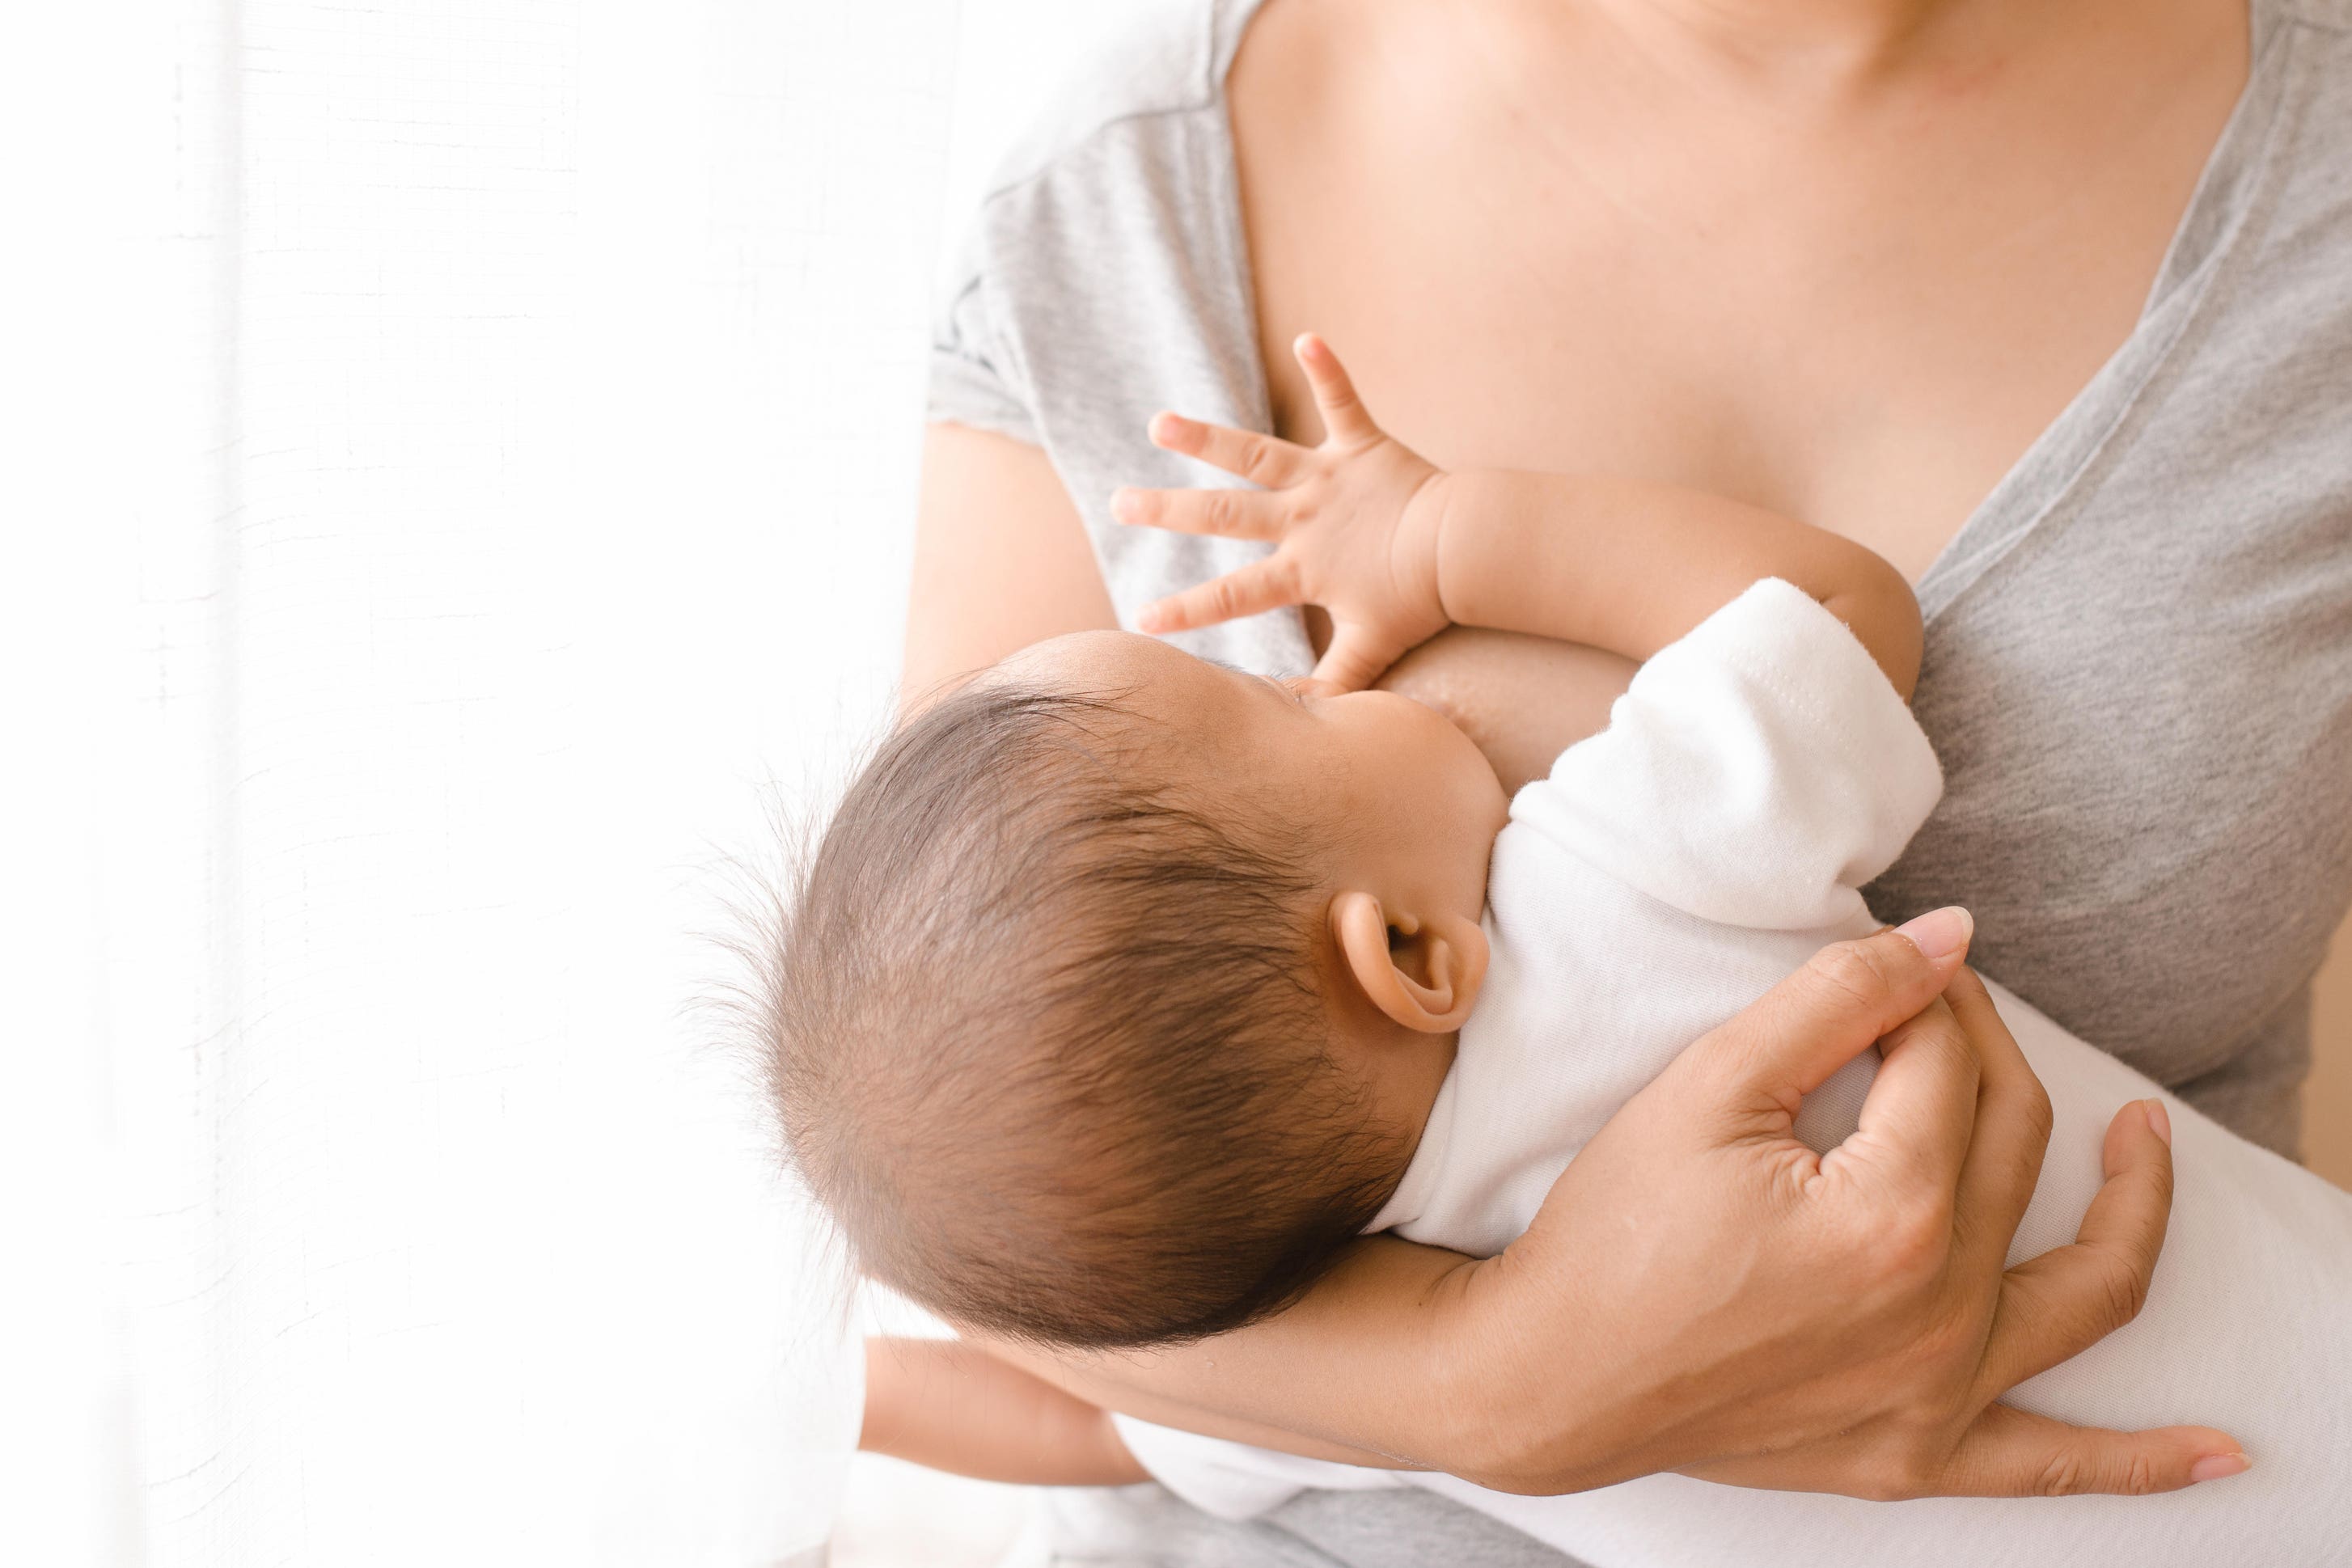 Do you need to watch what you eat when you're breastfeeding?